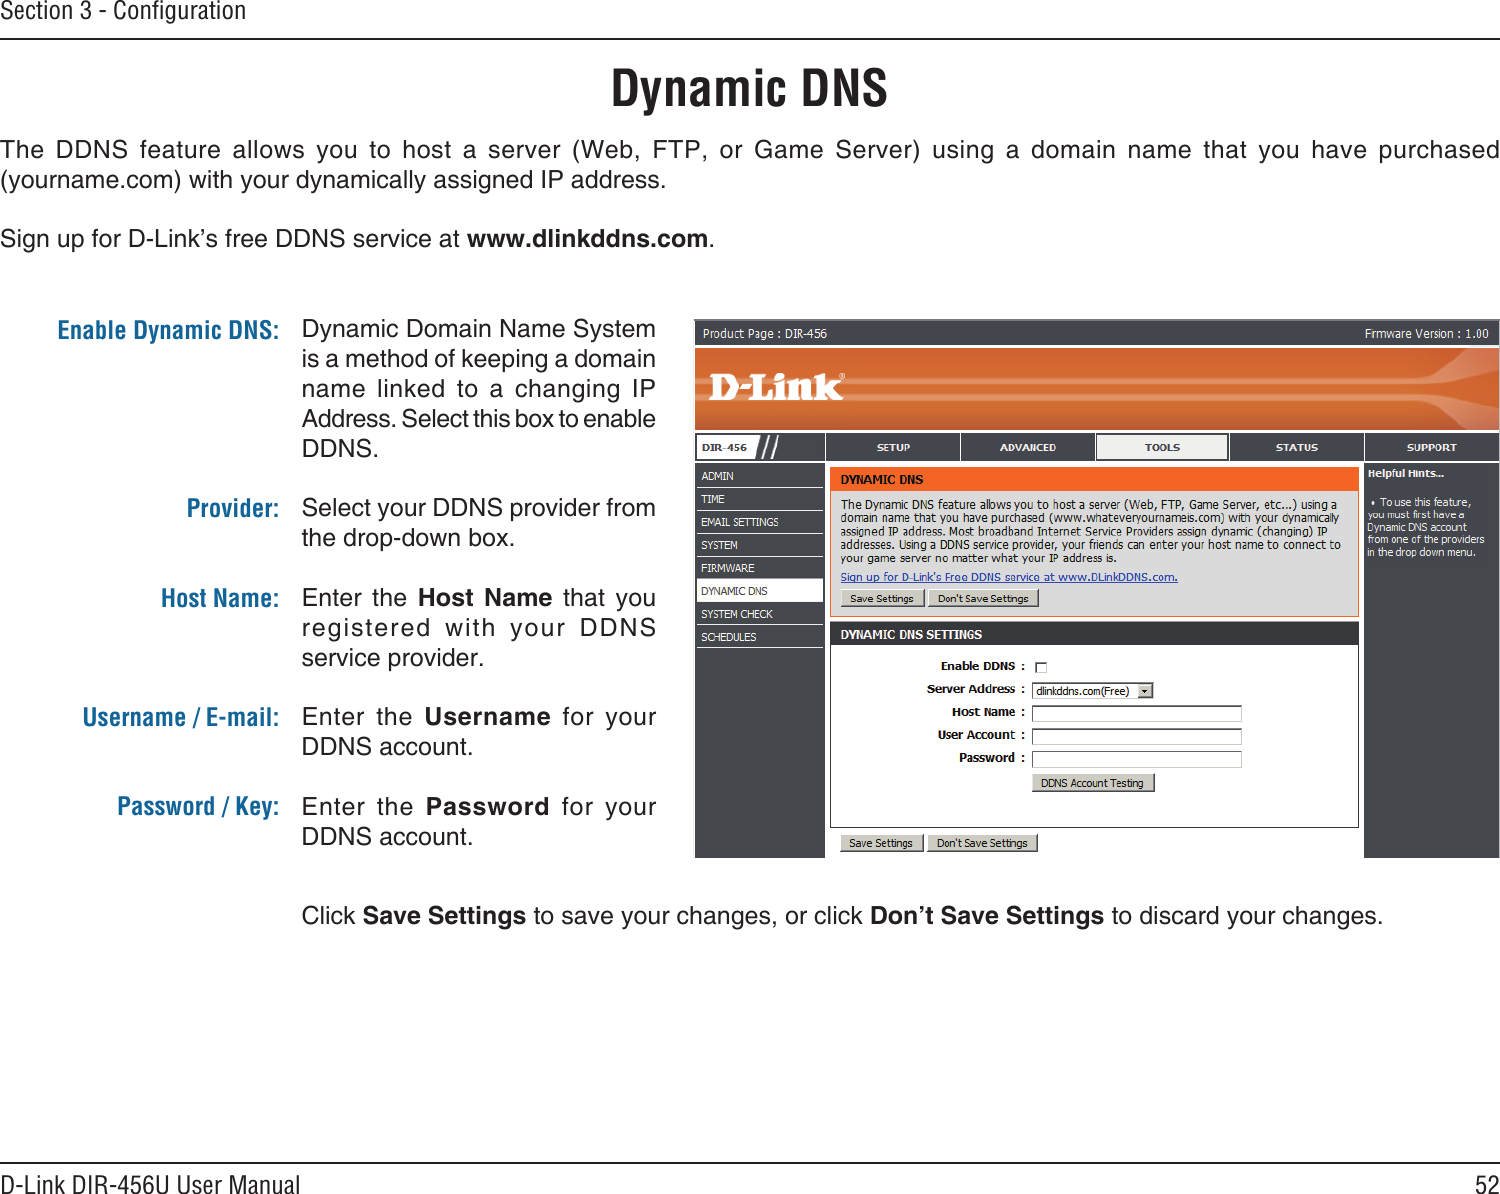 52D-Link DIR-456U User ManualSection 3 - ConﬁgurationDynamic DNSDynamic Domain Name System is a method of keeping a domain name  linked  to  a  changing  IP Address. Select this box to enable DDNS.Select your DDNS provider from the drop-down box.Enter  the  Host  Name  that  you registered  with  your  DDNS service provider.Enter  the  Username  for  your DDNS account.Enter  the  Password  for  your DDNS account.The  DDNS  feature  allows  you  to  host  a  server  (Web,  FTP,  or  Game  Server)  using  a  domain  name  that  you  have  purchased  (yourname.com) with your dynamically assigned IP address.Sign up for D-Link’s free DDNS service at www.dlinkddns.com.Enable Dynamic DNS:Provider: Host Name:Username / E-mail: Password / Key:Click Save Settings to save your changes, or click Don’t Save Settings to discard your changes.